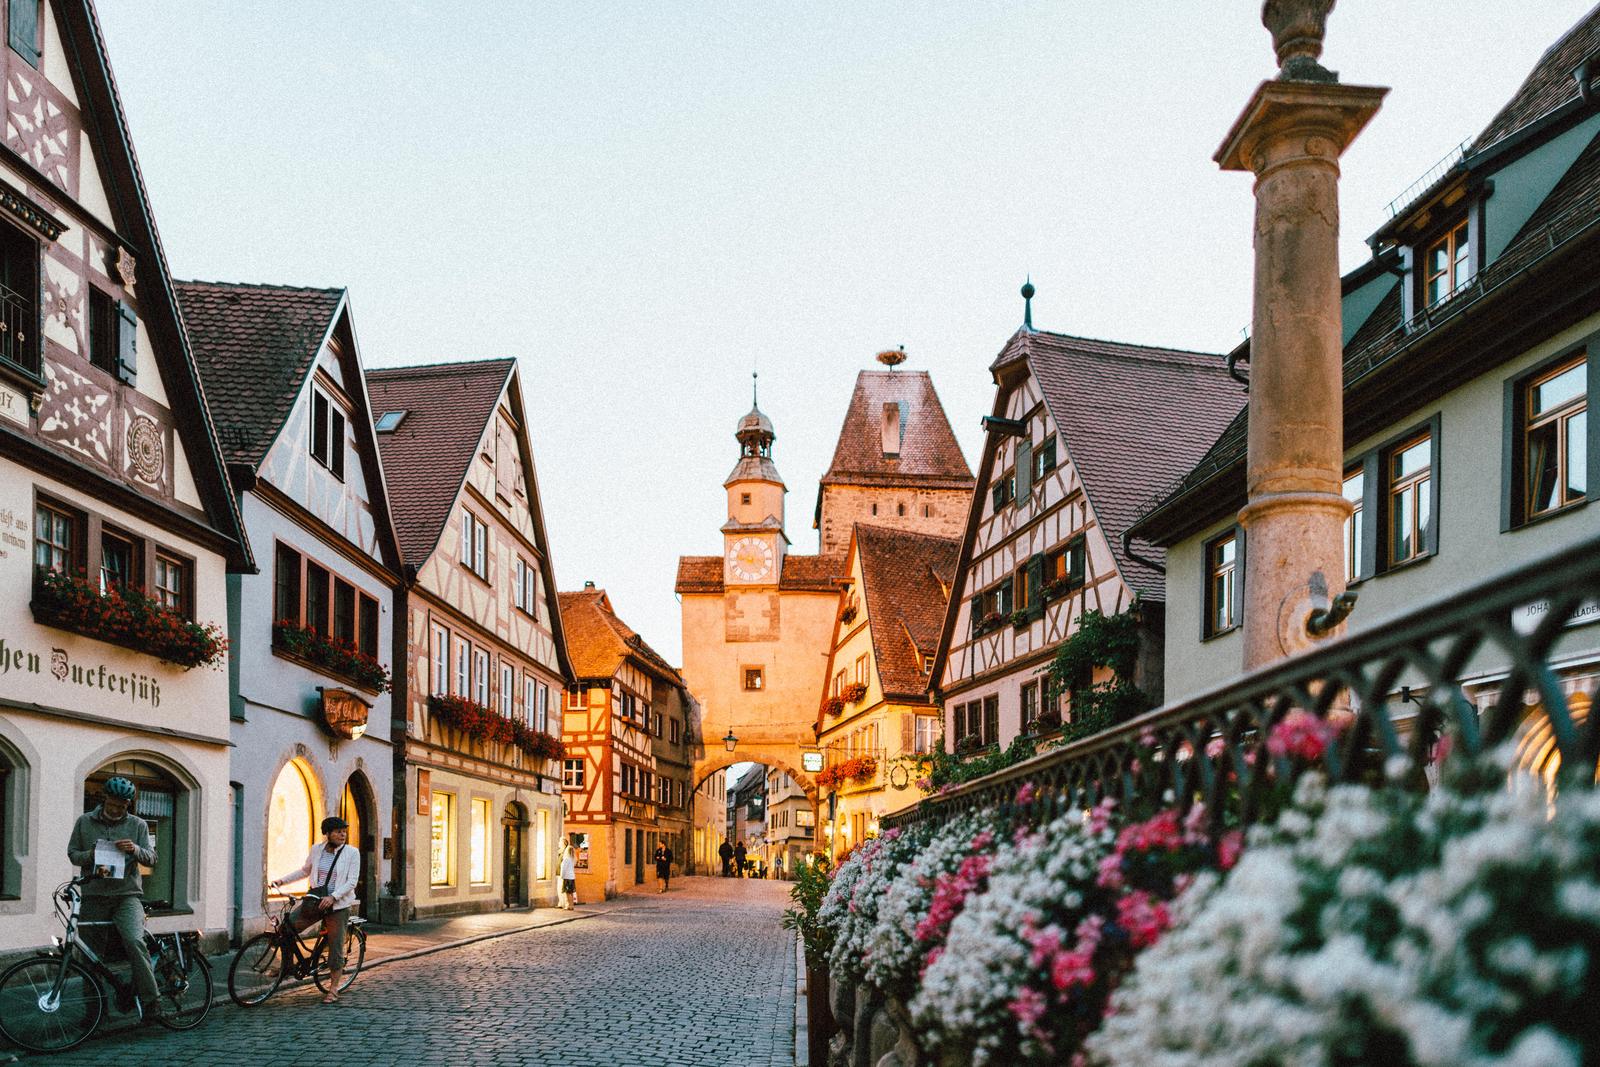 Geography Expert Quiz 🗺️: Match Capitals To Countries! Rothenburg, Germany